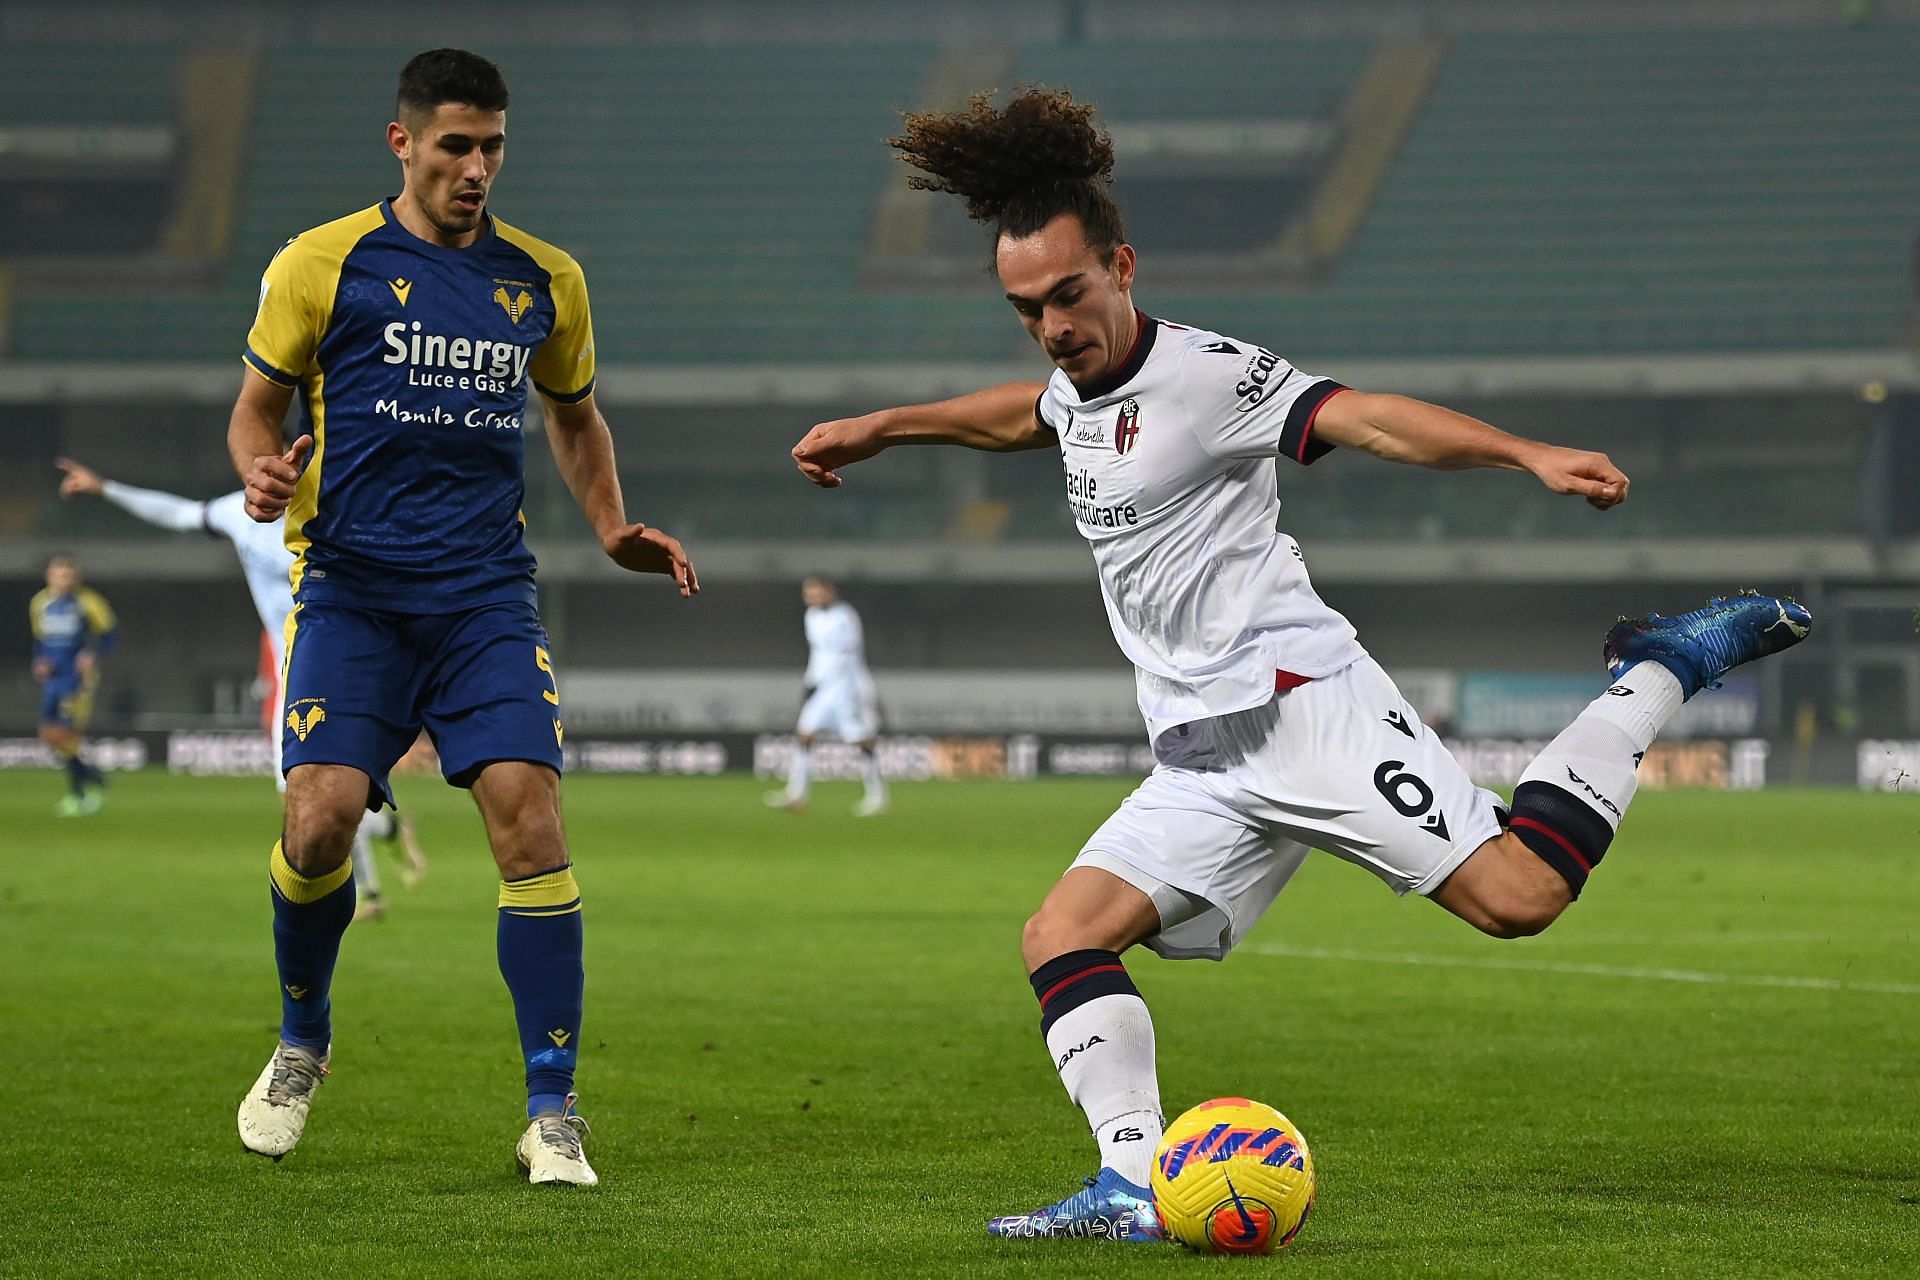 Bologna and Verona have both lost their opening game of the league season